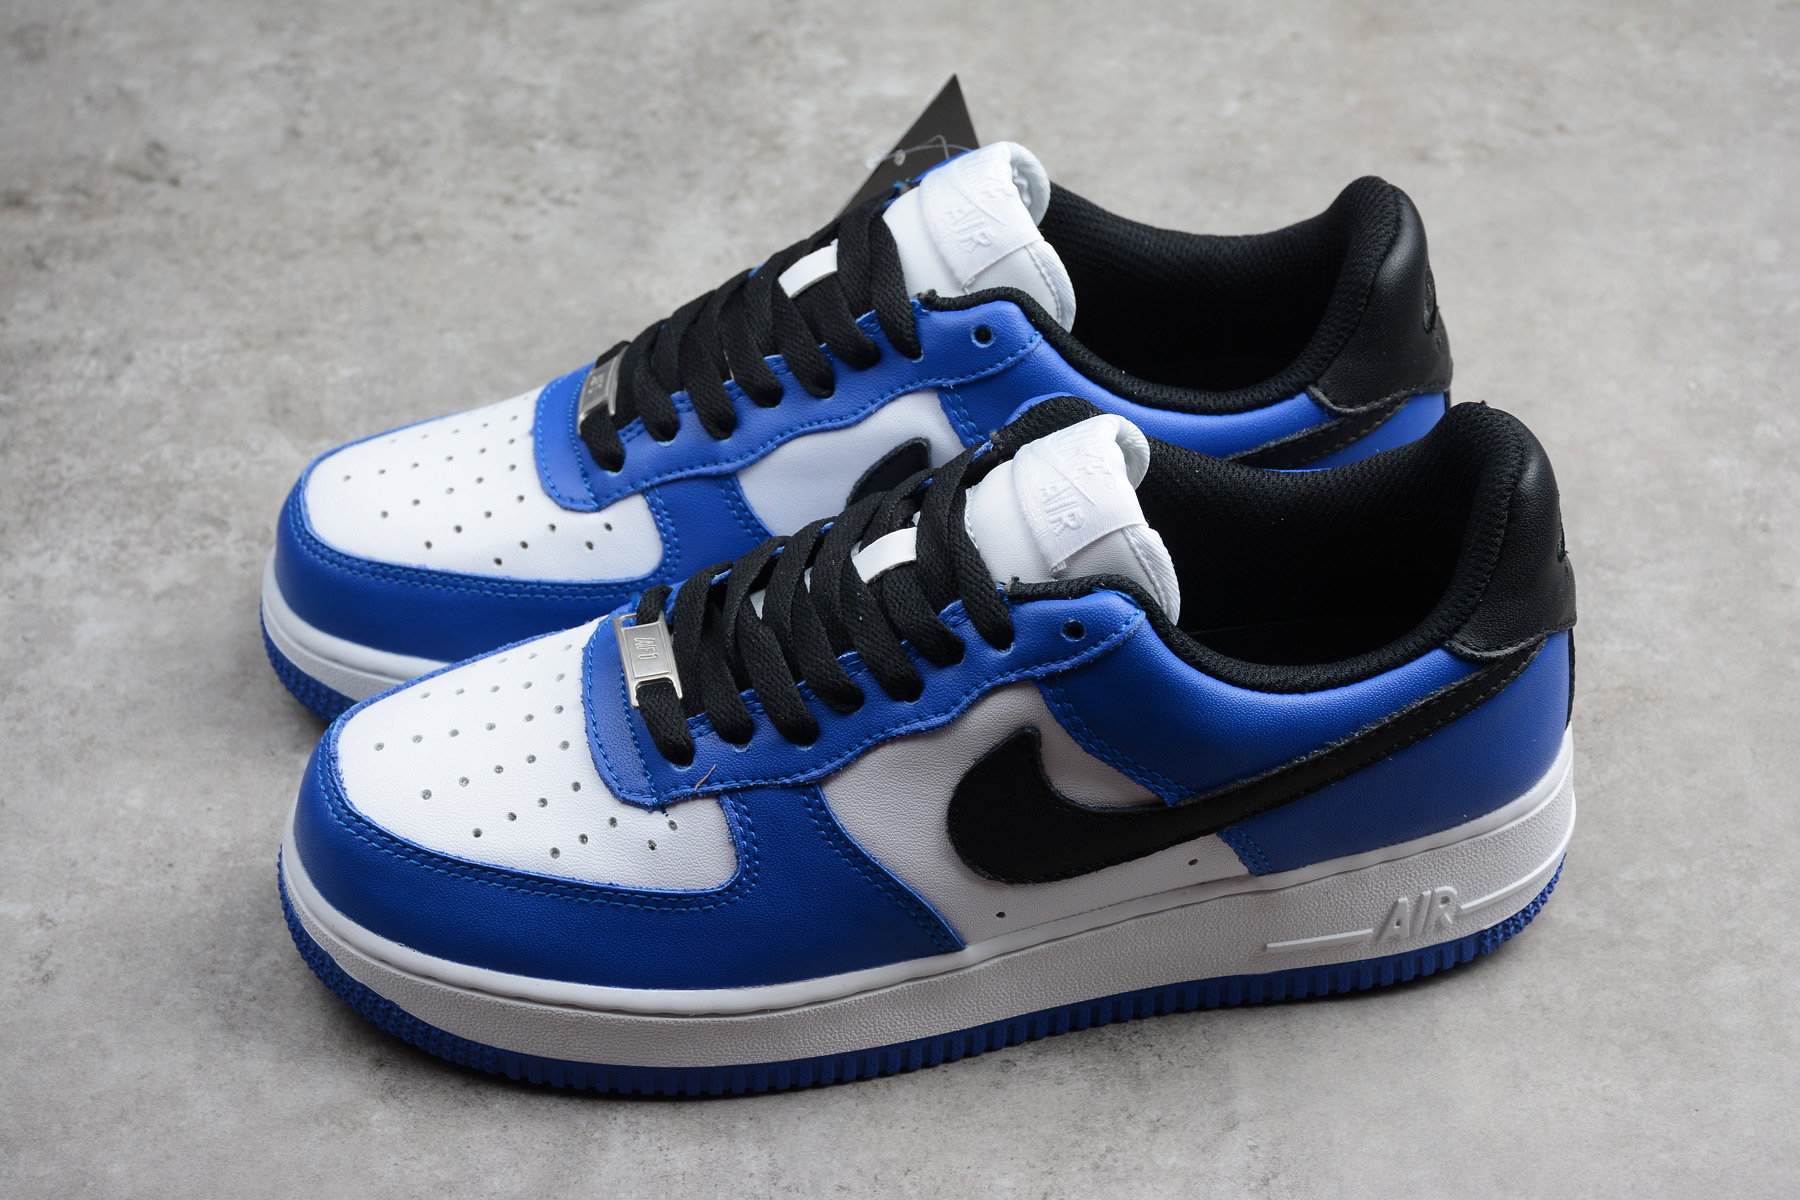 Nike Air Force 1 Low "Sapphire Blue" For Sale